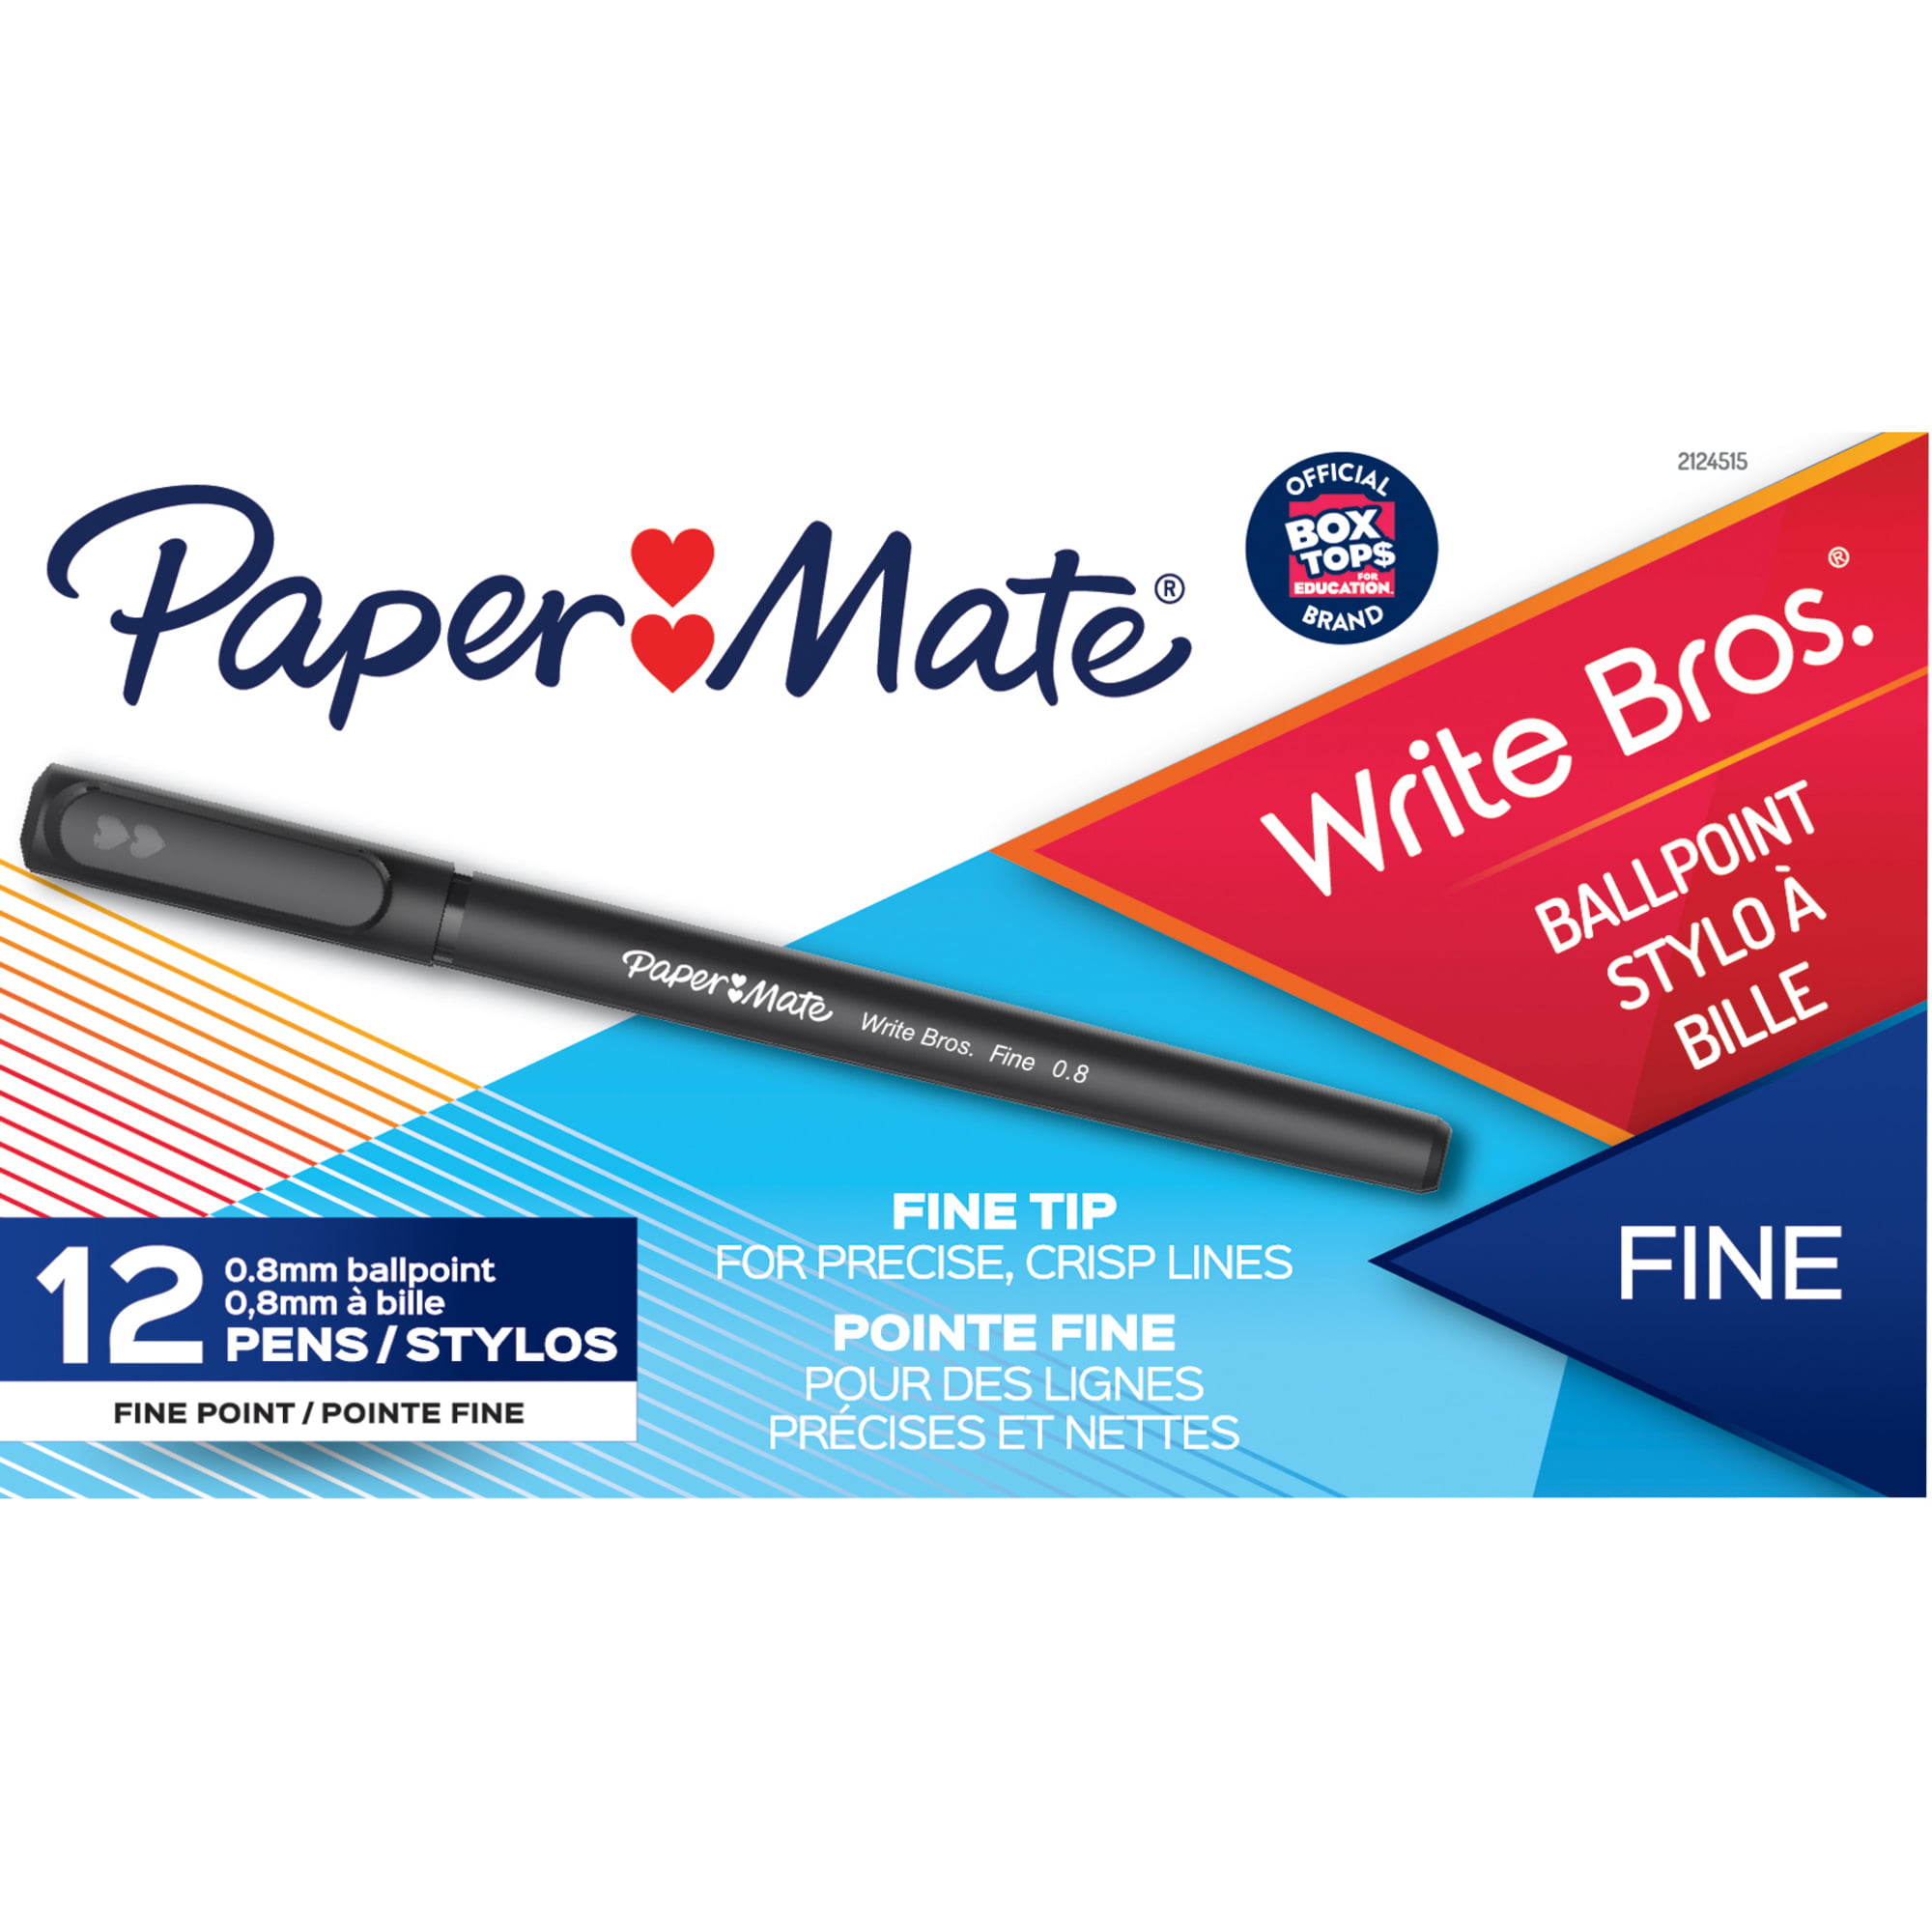 1.0mm 10-Count Blue Ink Medium Point Paper Mate Eagle Stick Ball Point Pens 